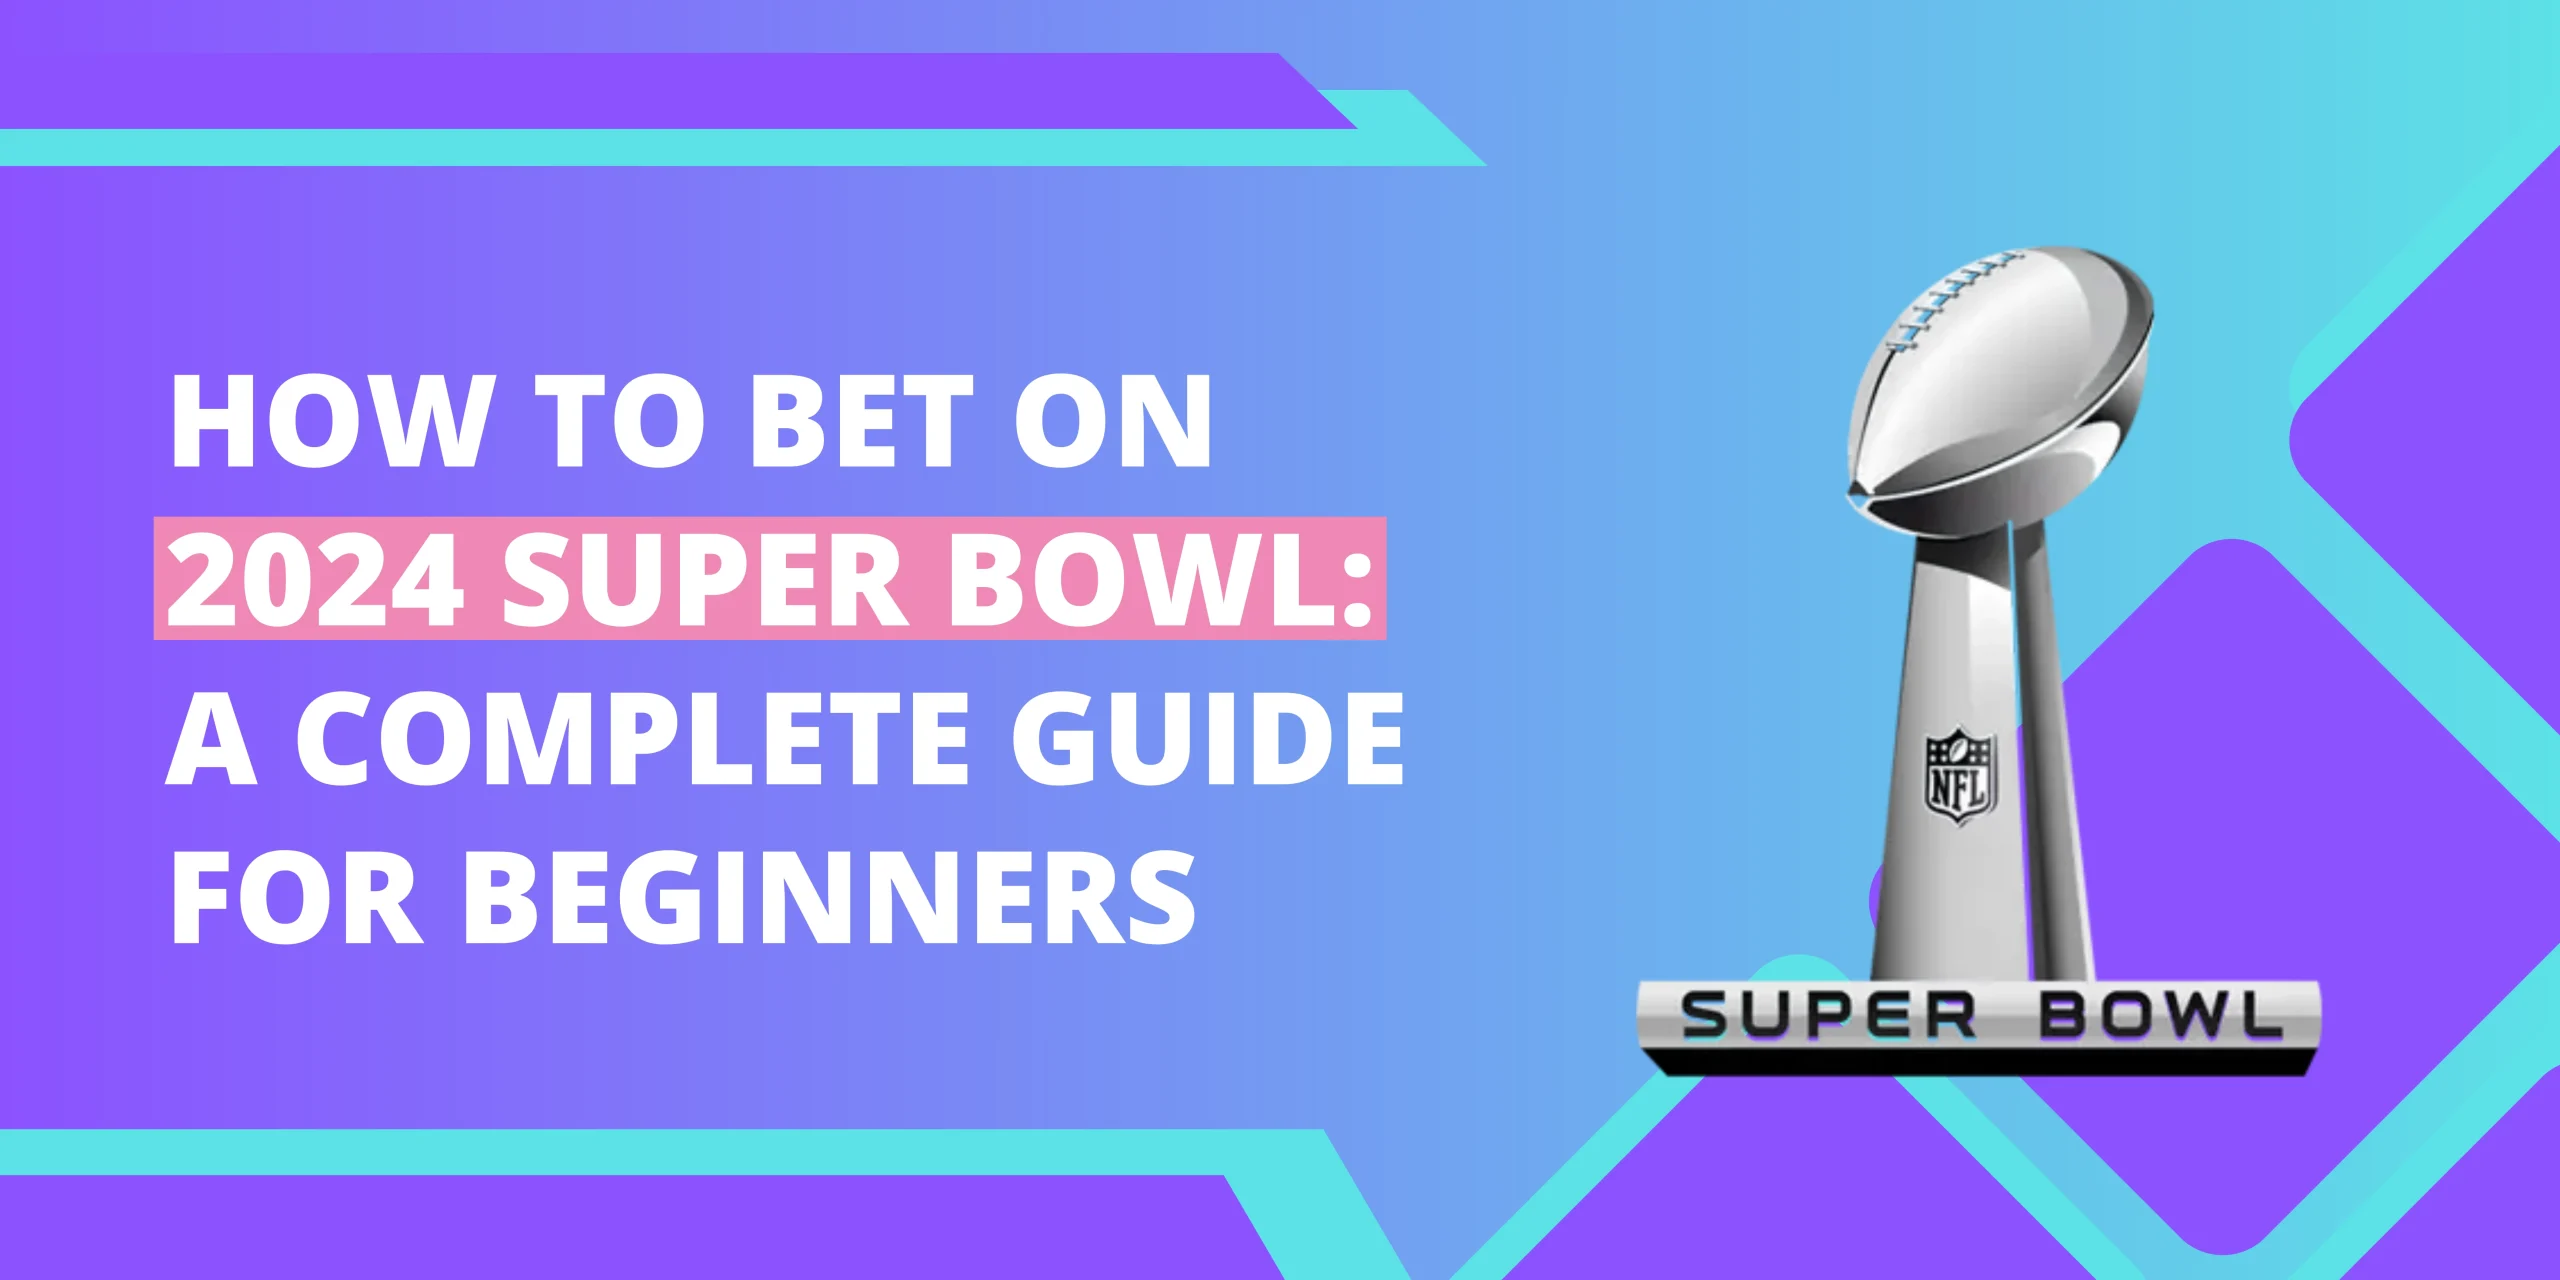 How to Bet on 2024 Super Bowl: A Complete Guide for Beginners